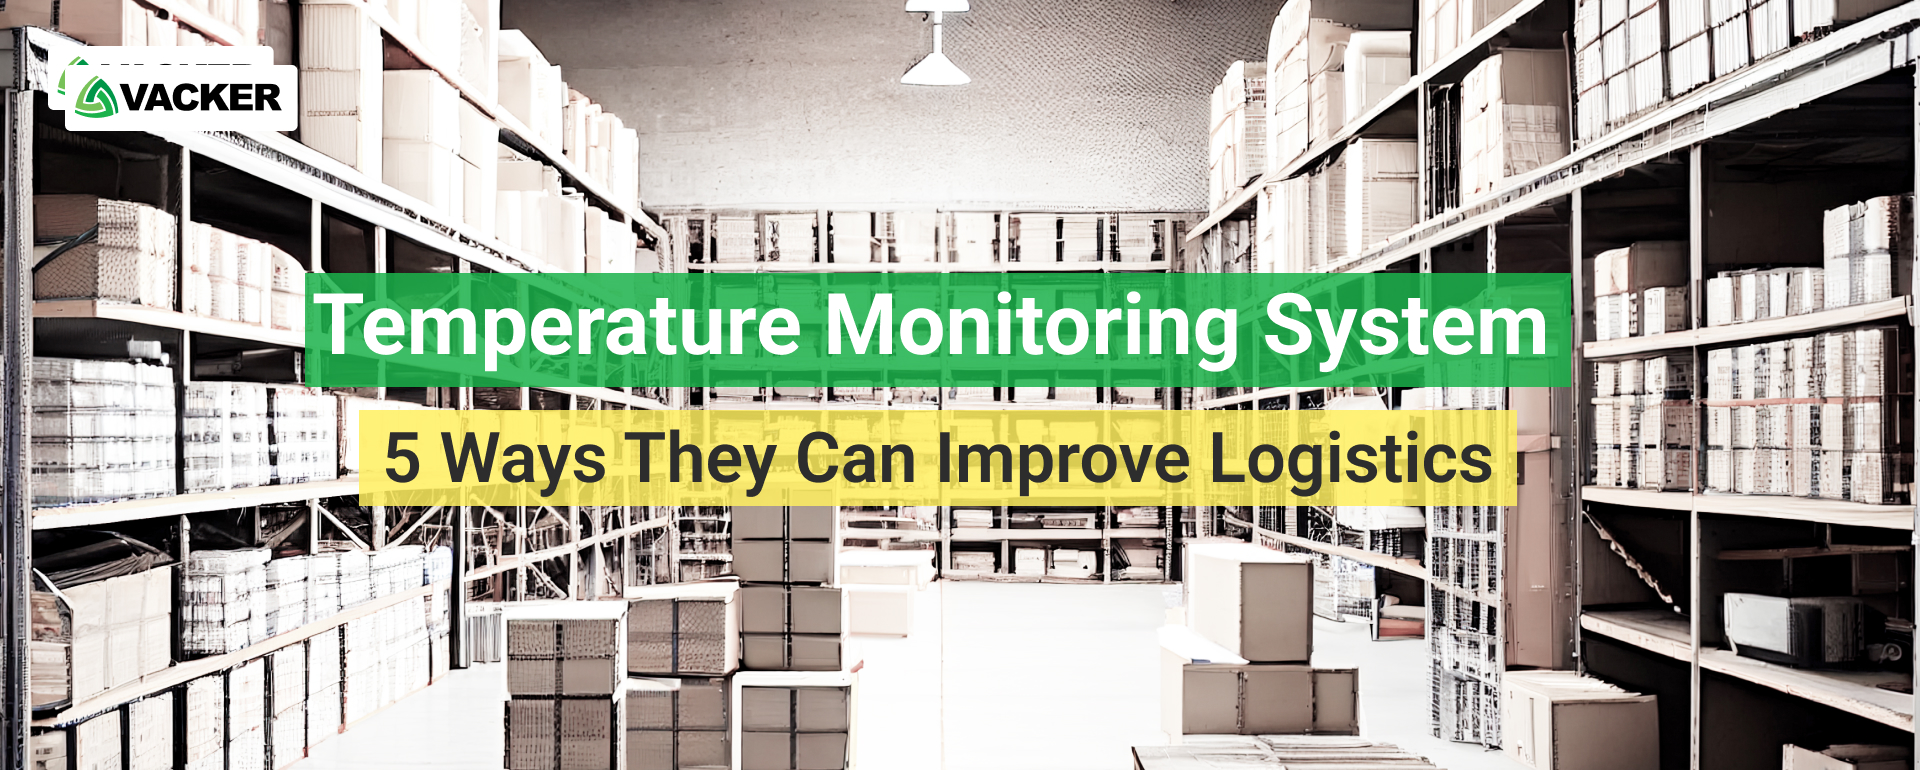 Temperature Monitoring System – 5 Ways They Can Improve Logistics